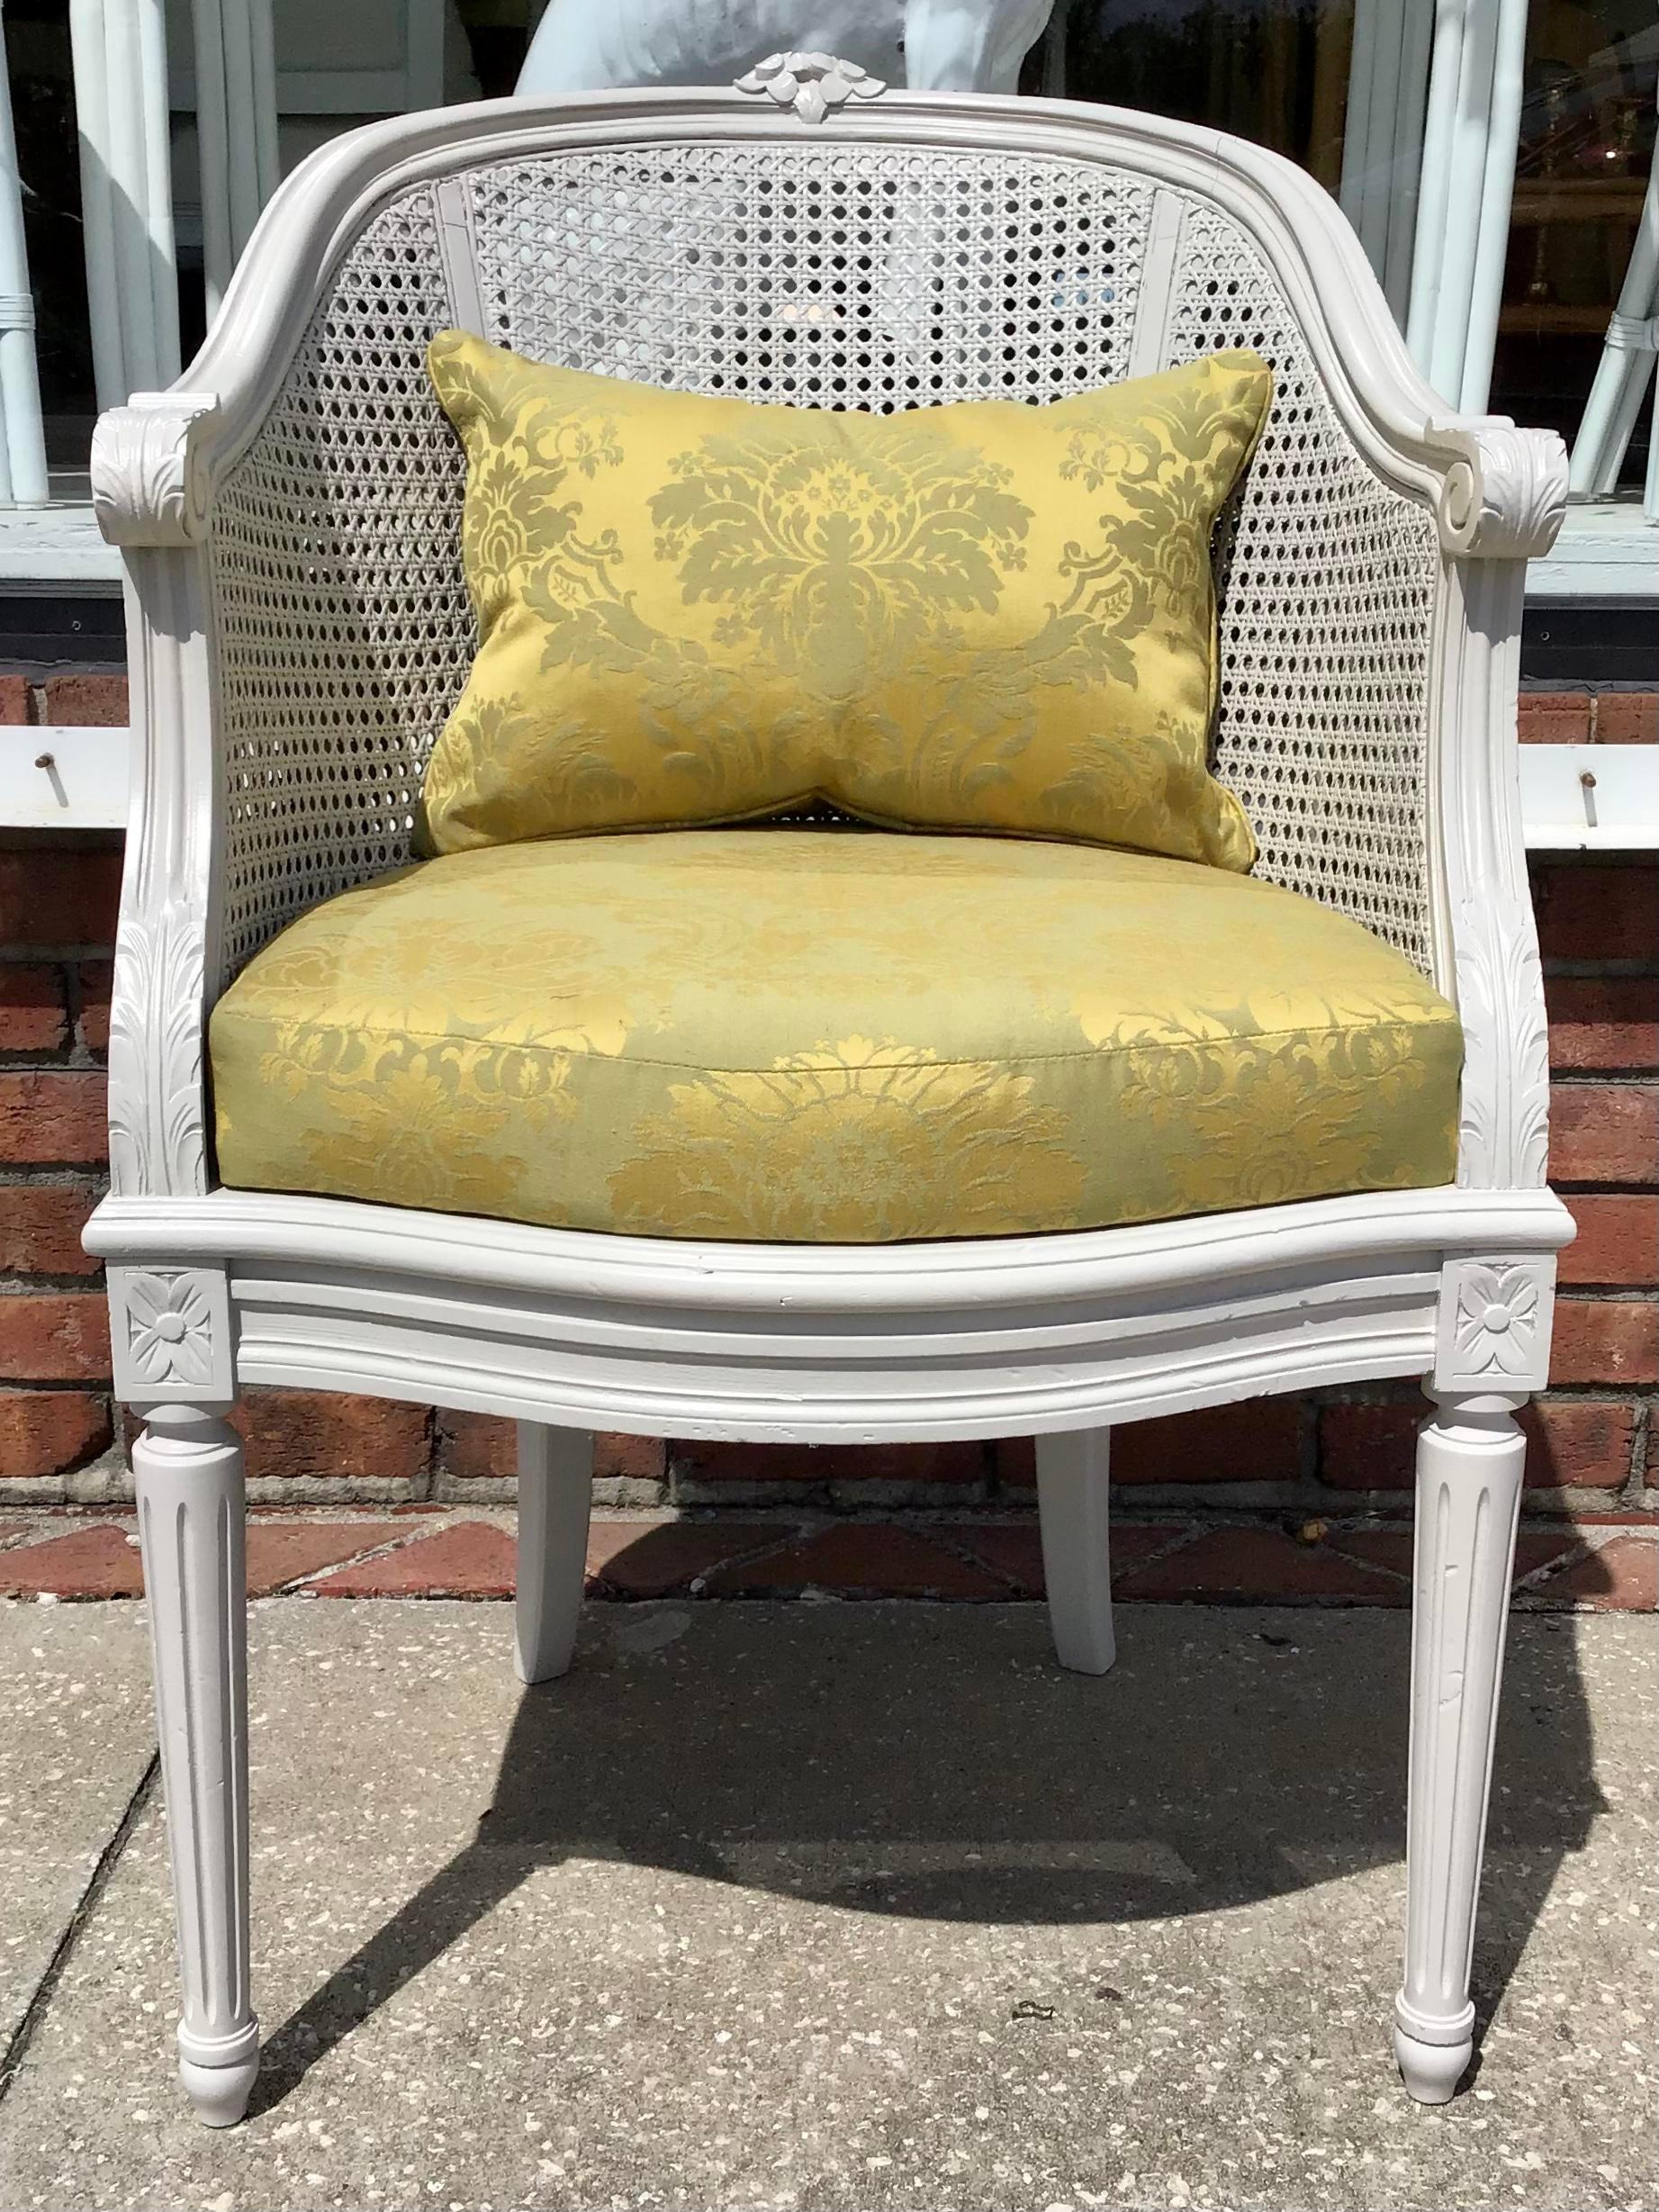 Classic Chic French Louis XVI barrel chair with new gray lacquer finish and gold todd hase upholstery. Lovely Caine work on the barrel shape.